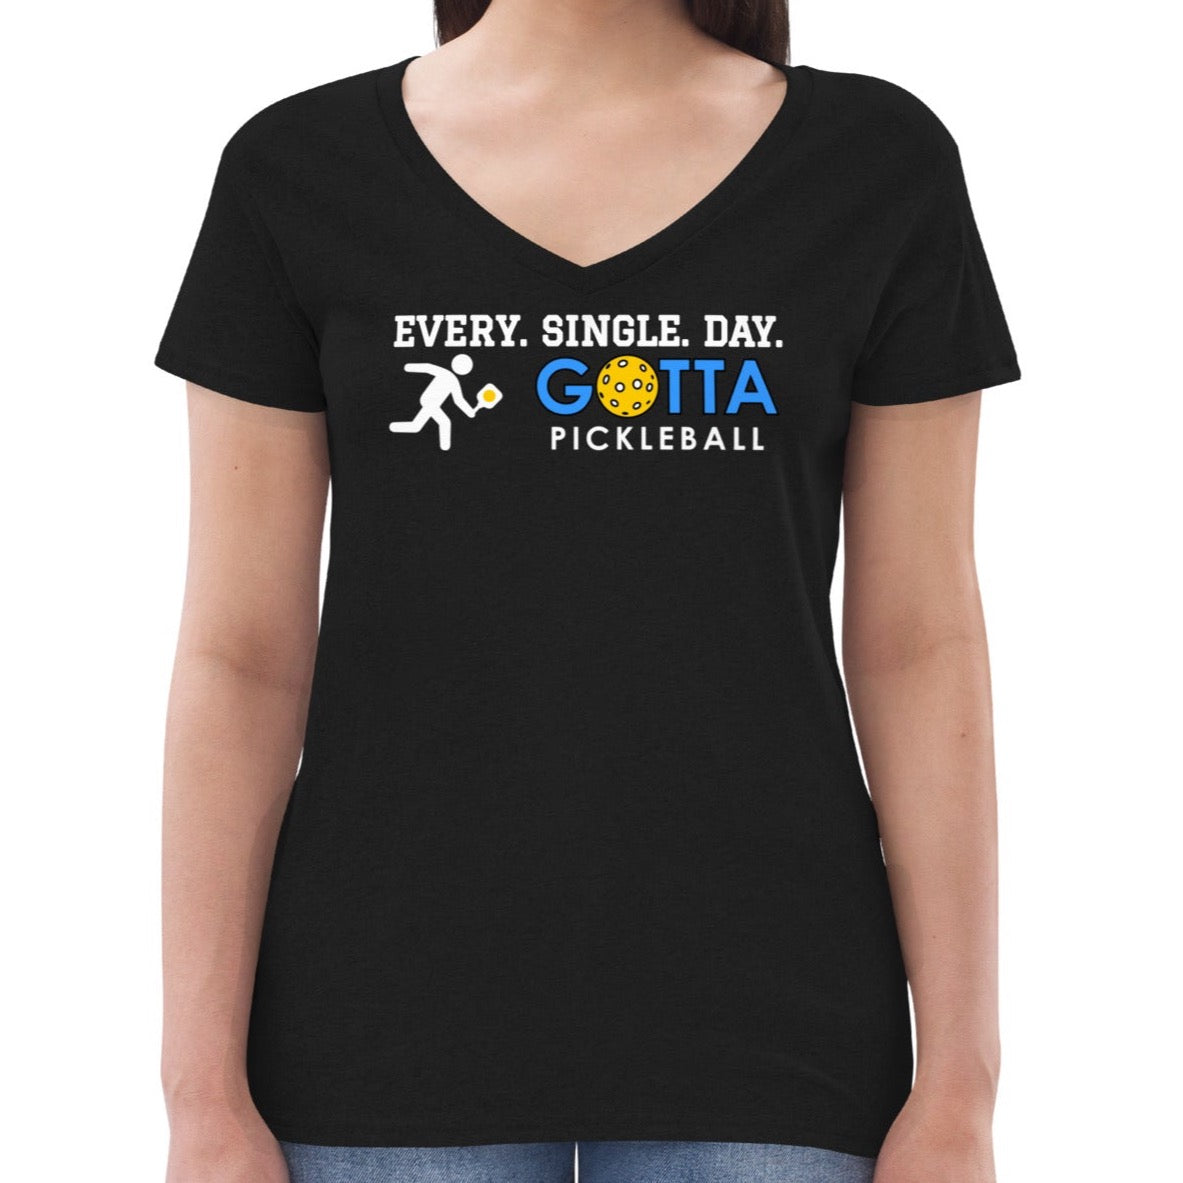 gotta pickleball every single day v-neck t-shirt mascot ozzie with paddle